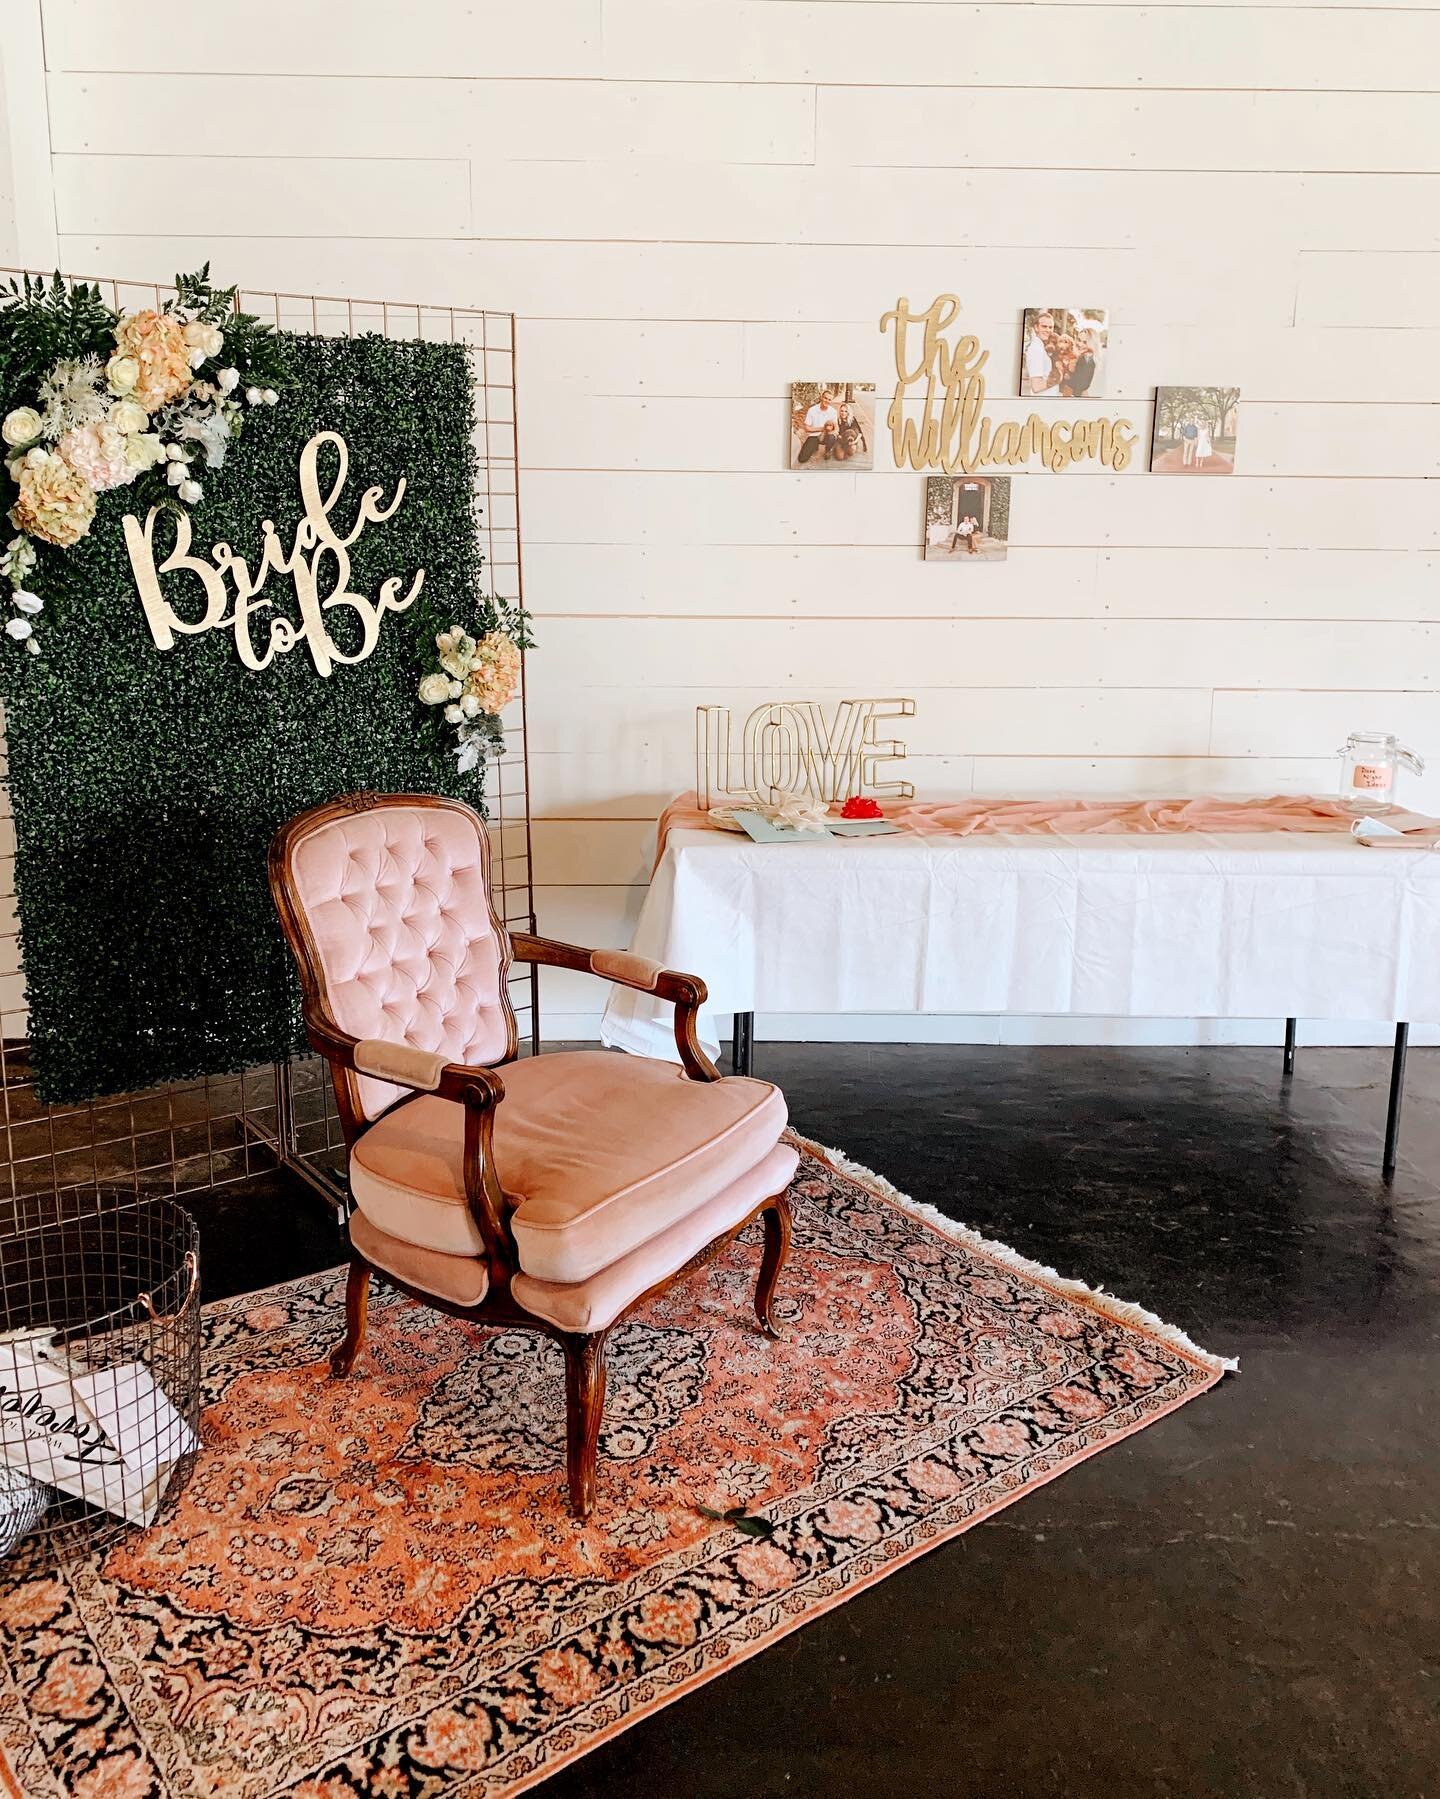 Bride To Be vibes ✨ Our shiplap wall is hands down the most popular when it comes to backdrops, altar pieces and head tables, etc. It&rsquo;s the perfect space for your own personal touch for your event! 

What wall will you be using for your main at